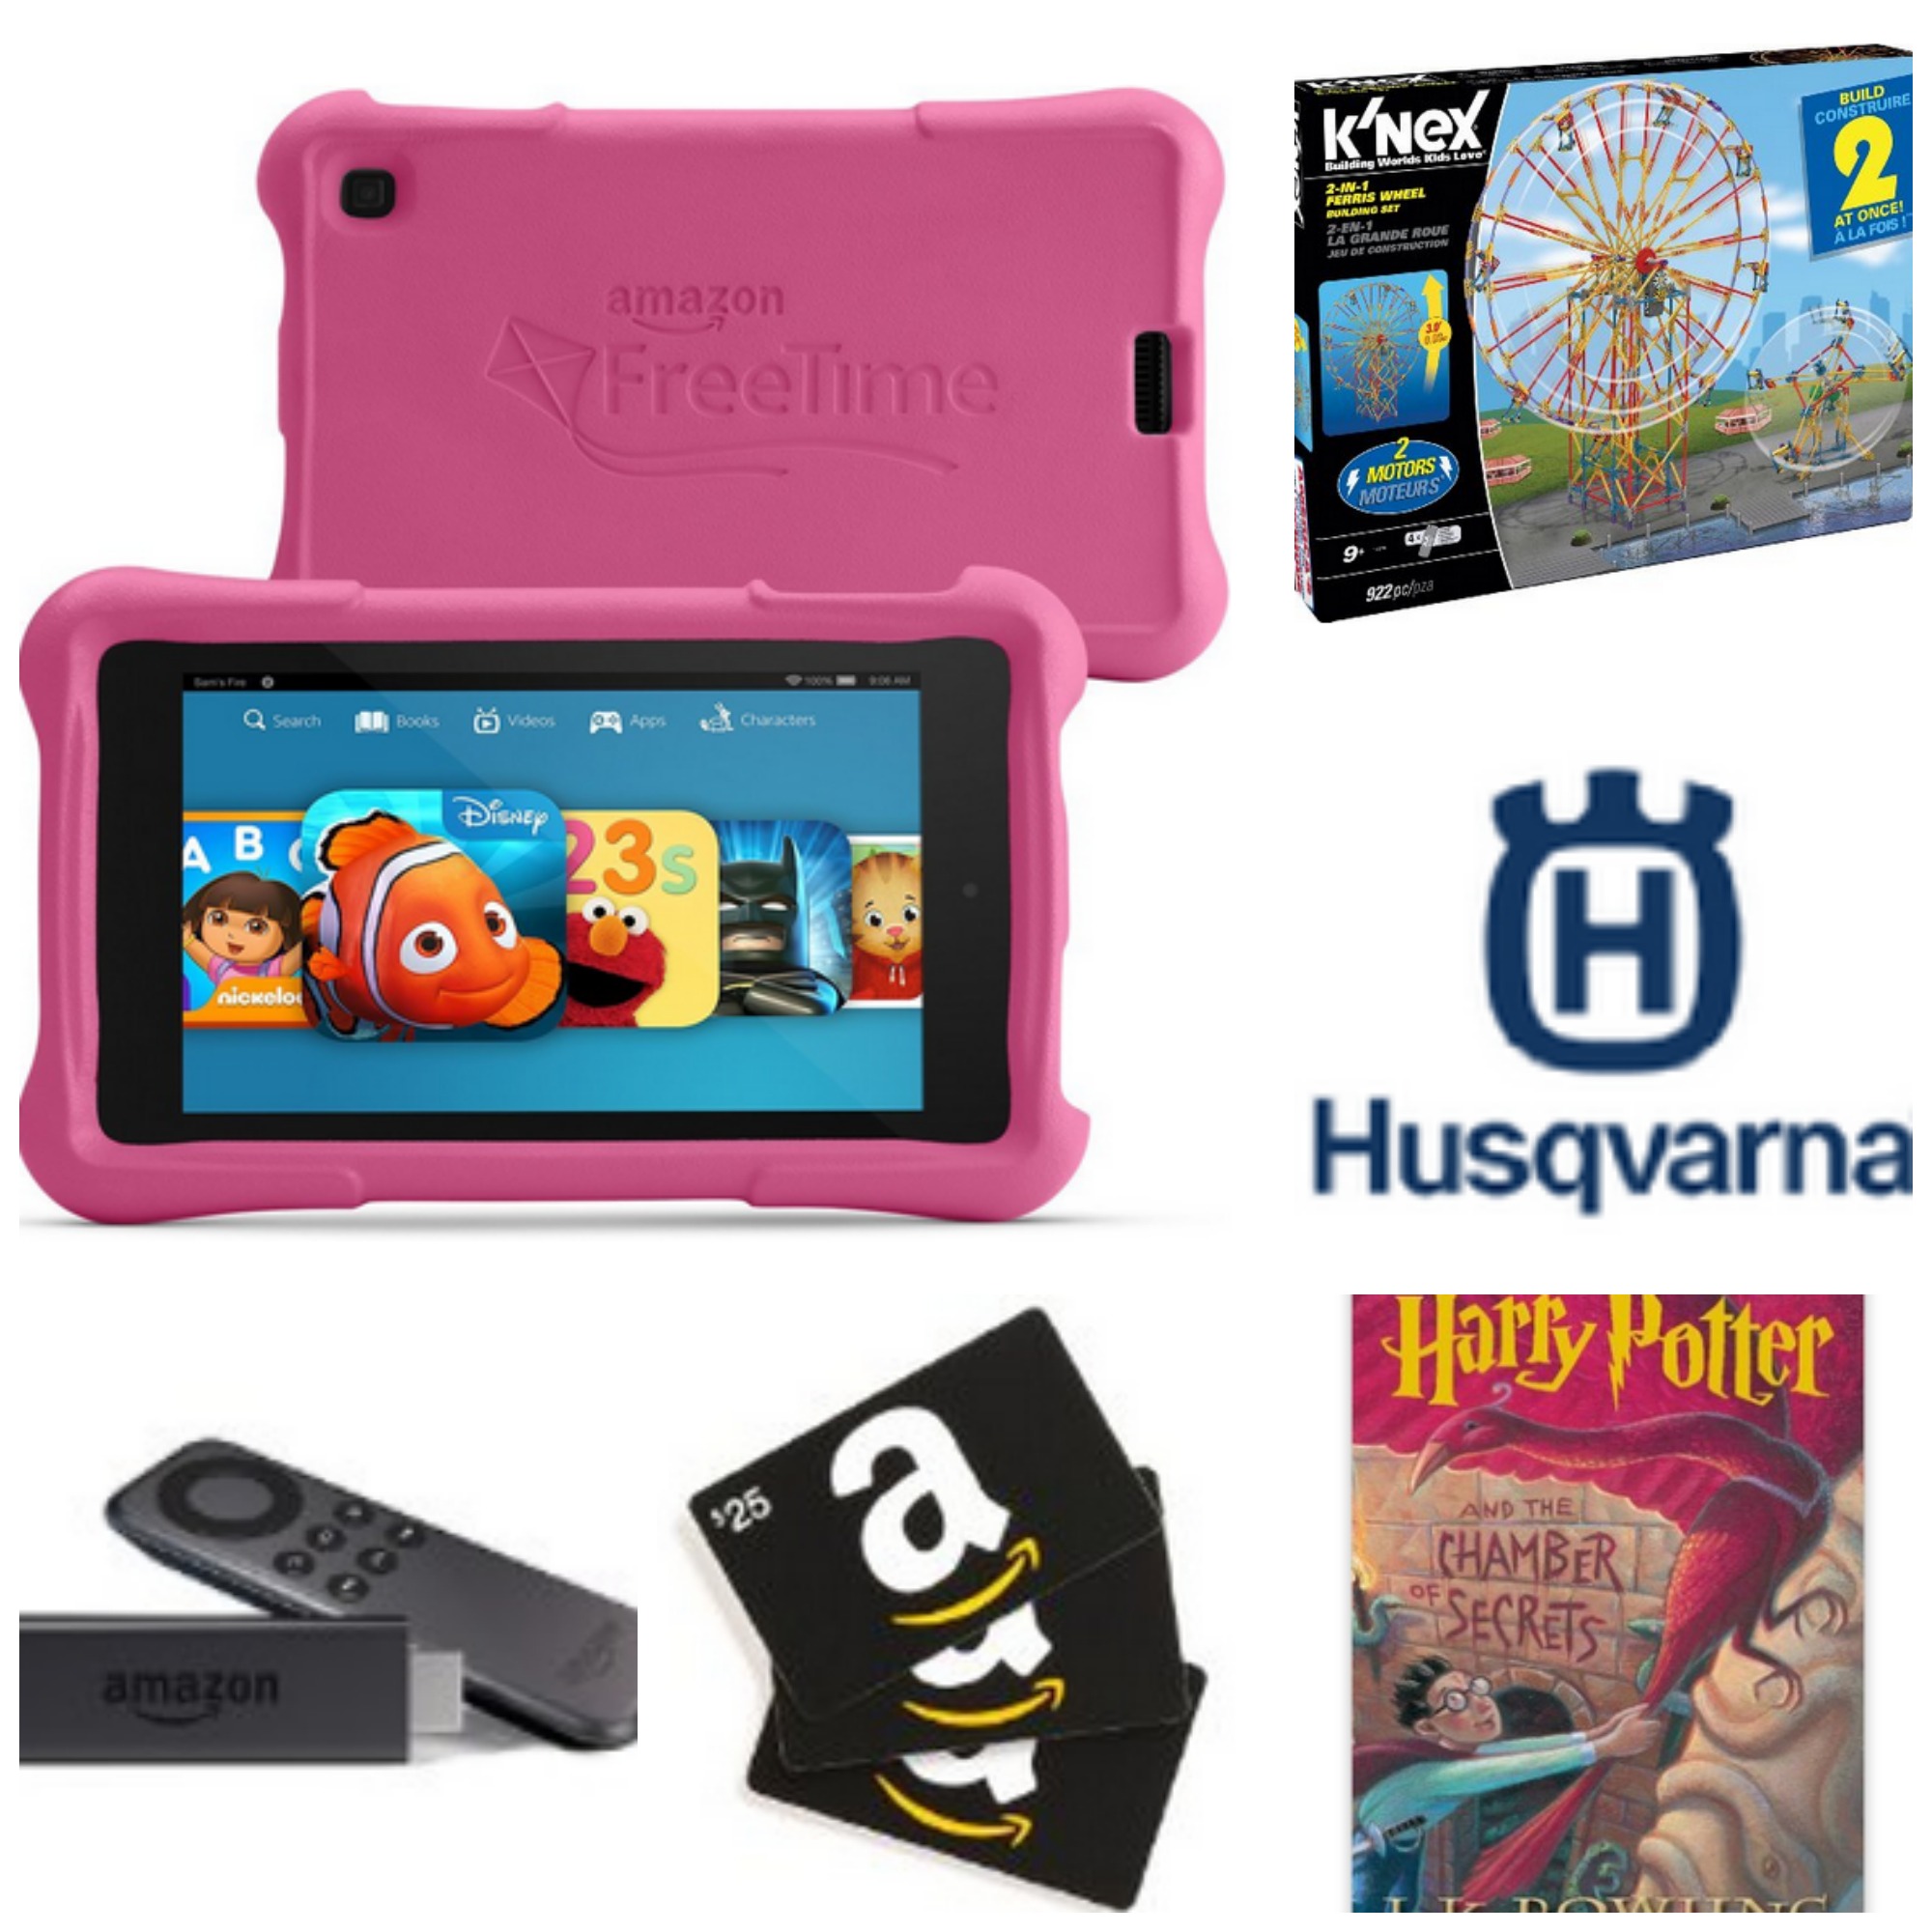 Prime Day- Exclusive Daily Deals and Lightning Deals! - My Frugal  Adventures